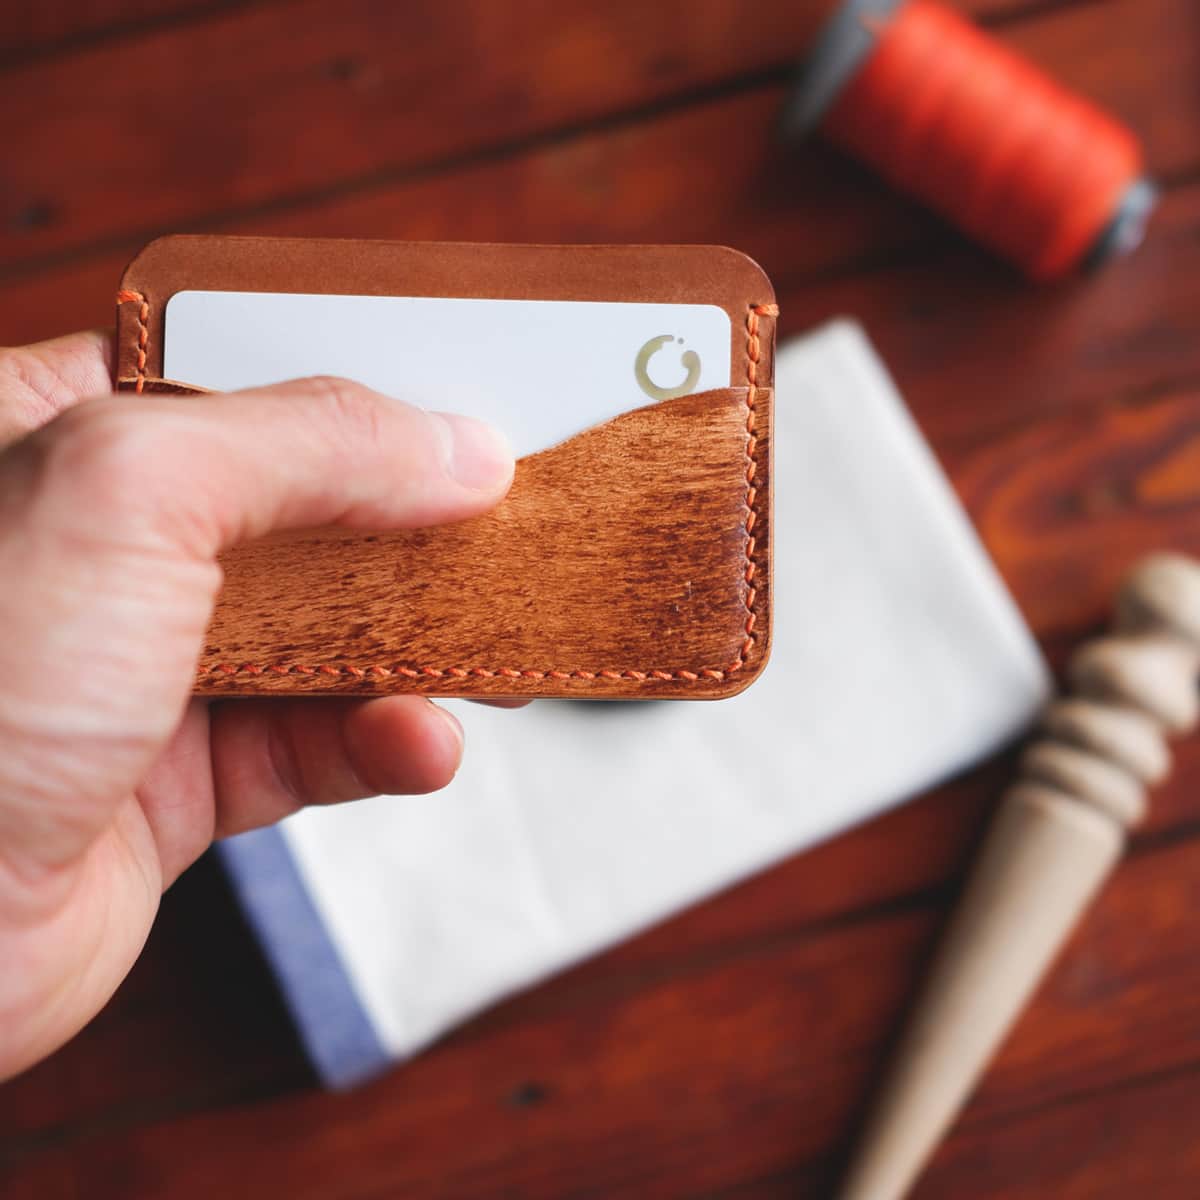 The Pinyon Card Holder in Brown Appaloosa and Whiskey Maya vegetable tanned leather held in hand